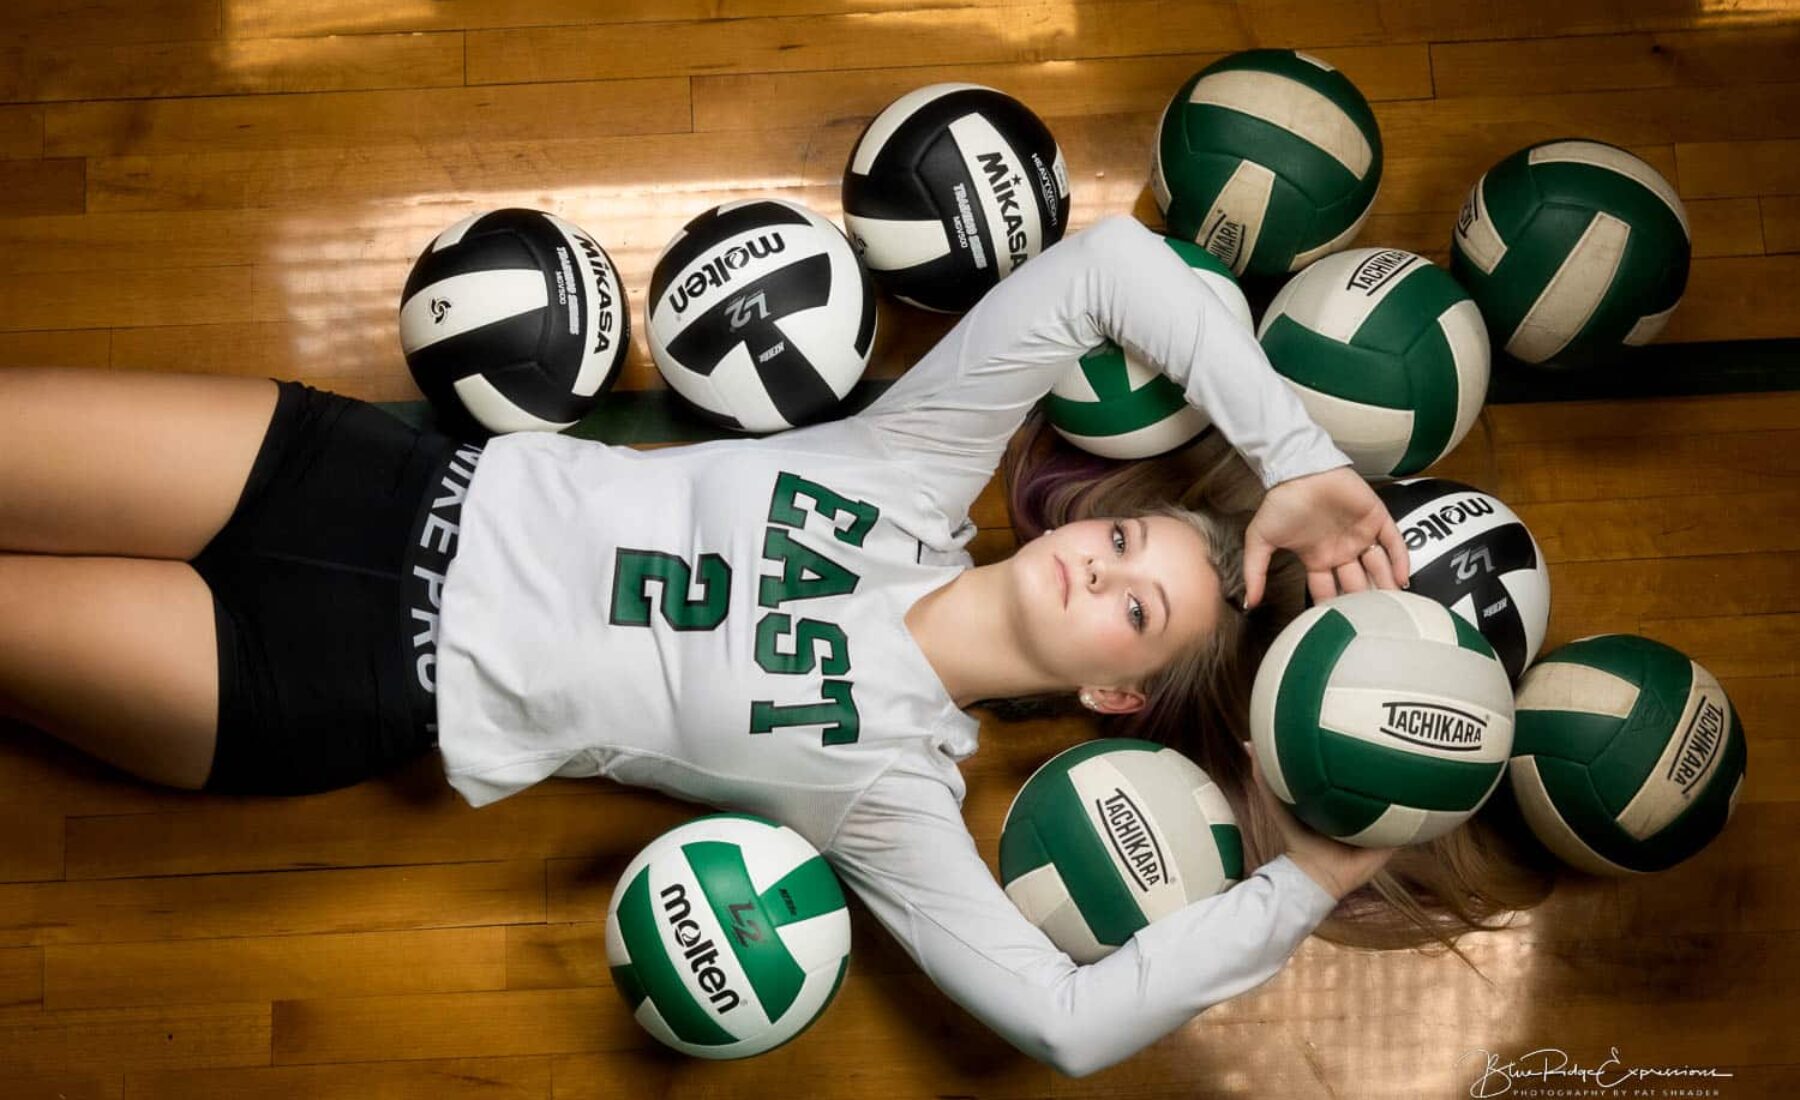 Caden’s Incredible Sports Portraits Celebrates Her Senior Year in Style